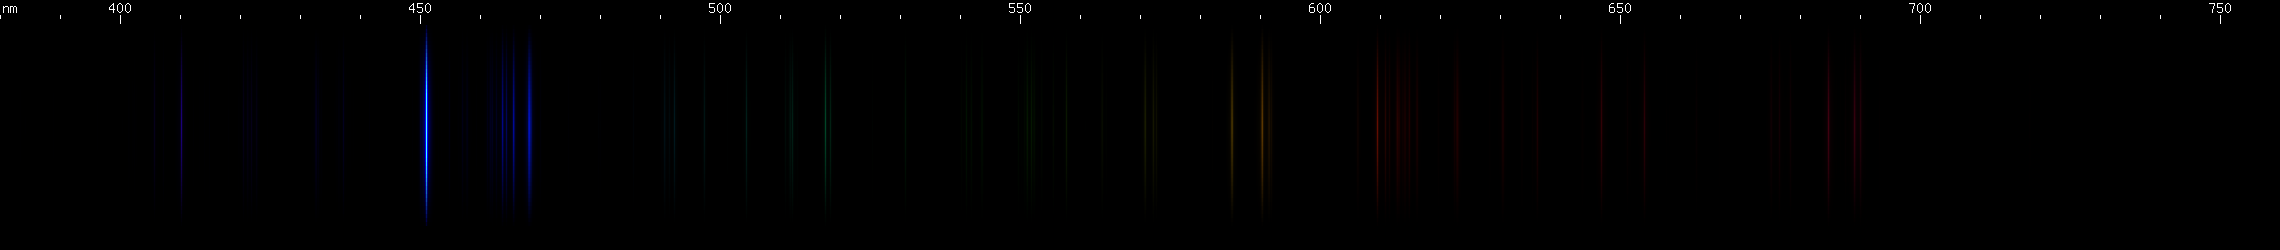 Spectral lines of Indium.